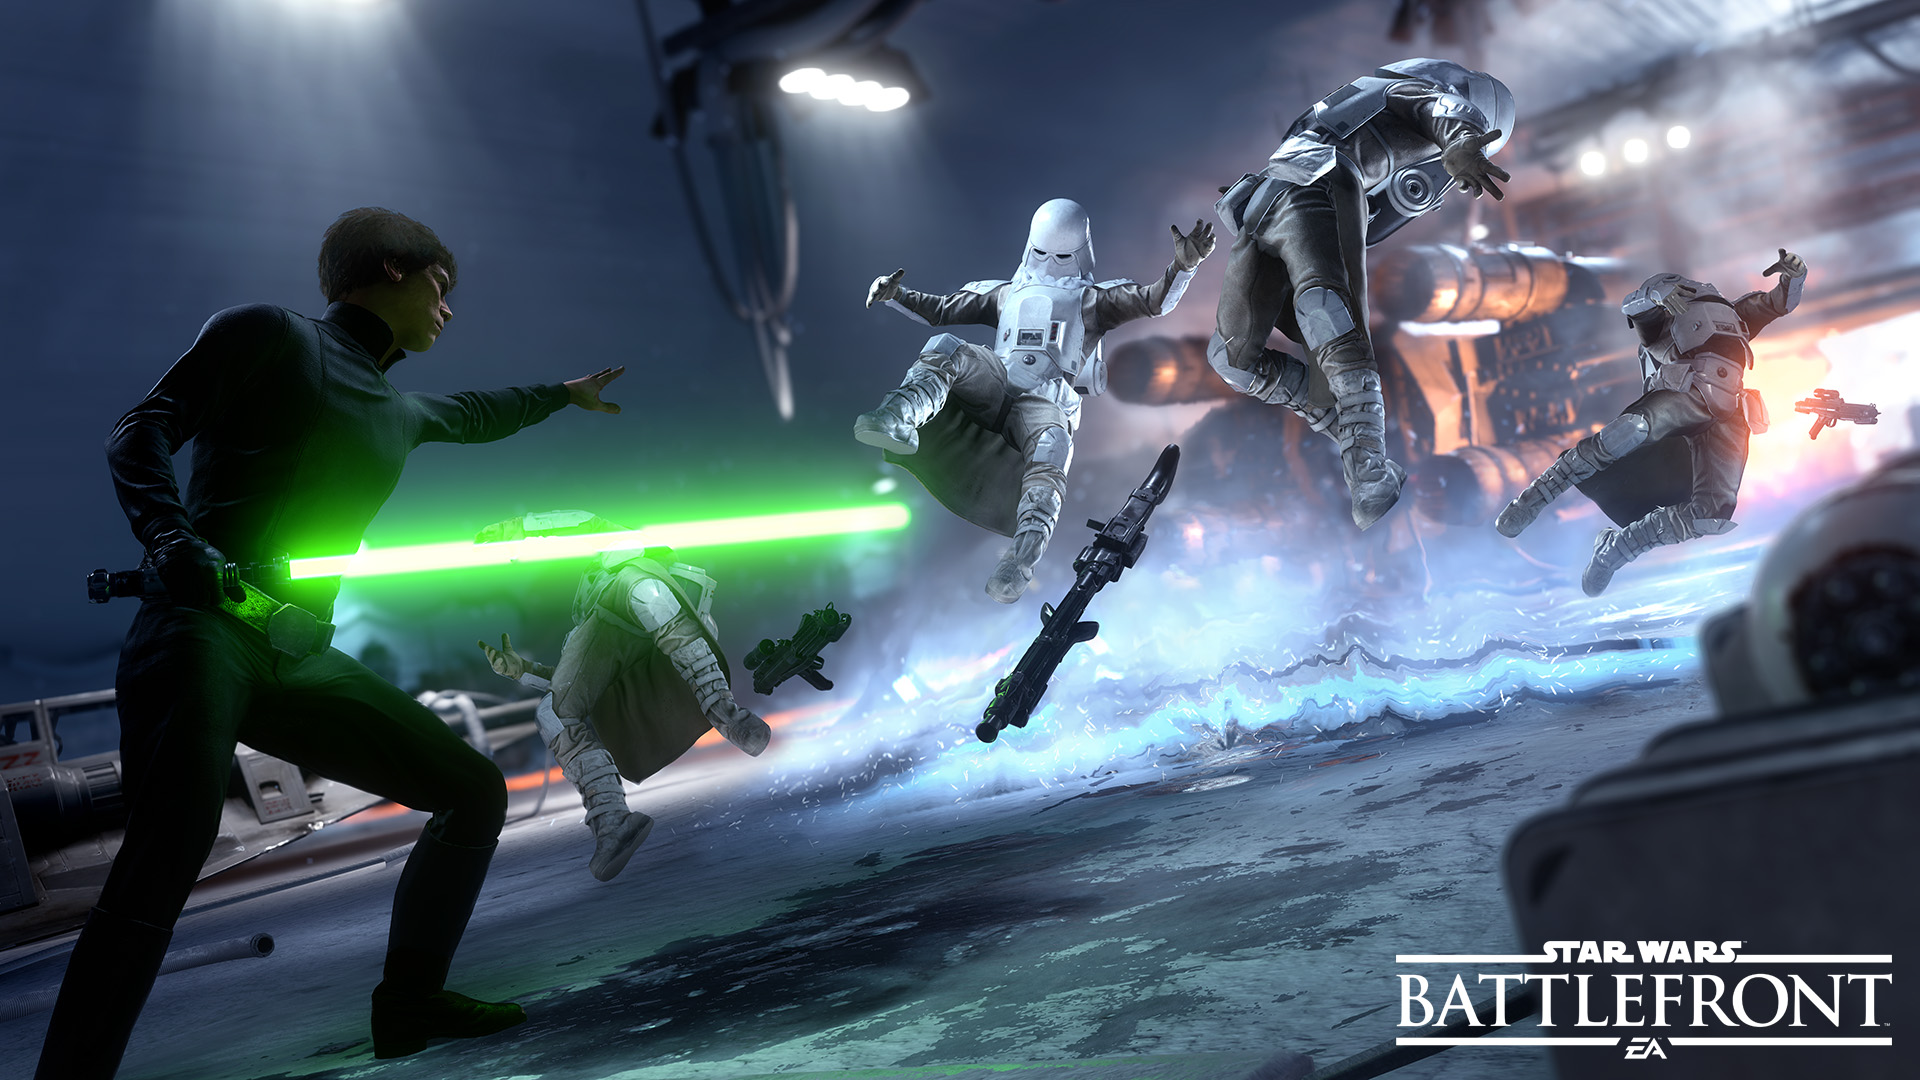 Star Wars Battlefront 3 2015 Themepack With 4 HD Wallpapers